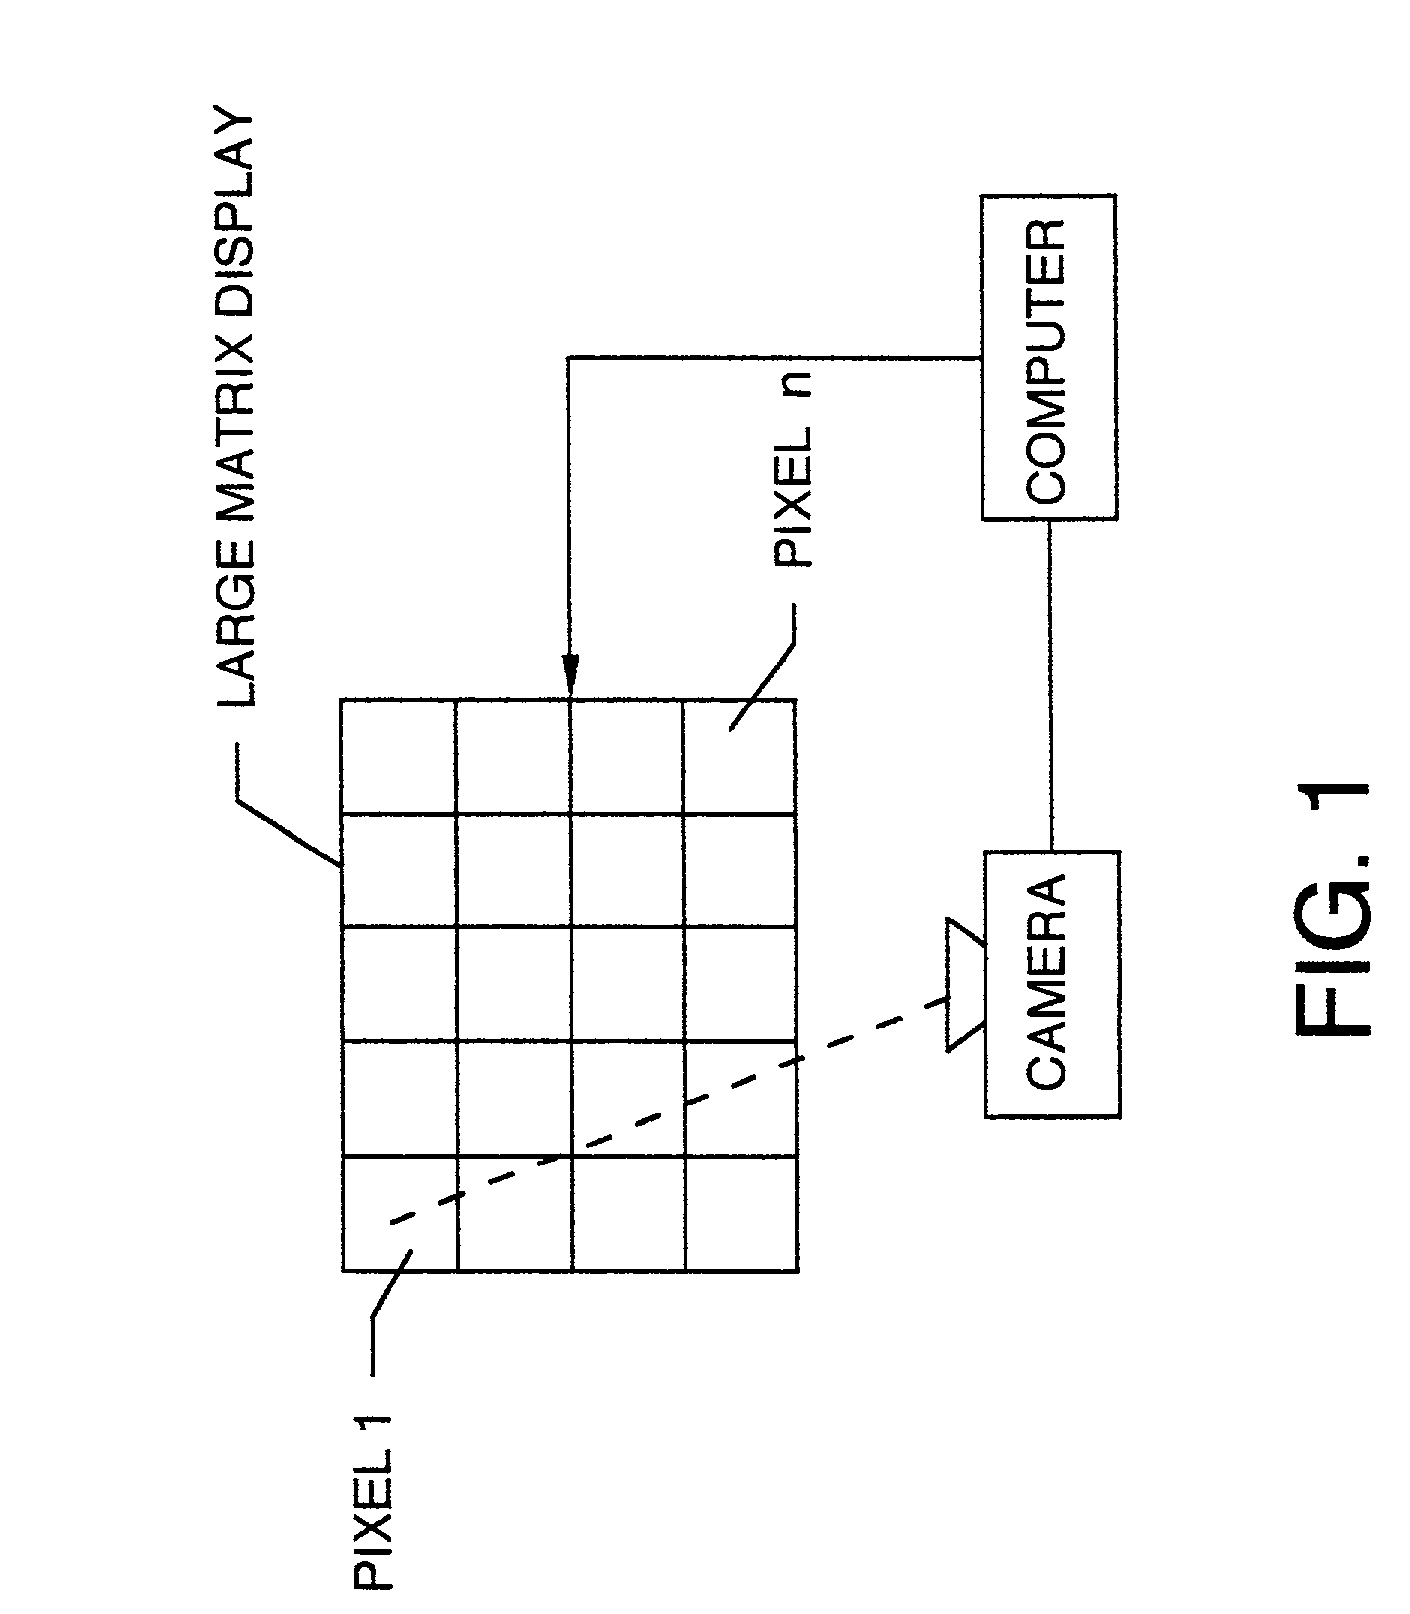 Calibration system for an electronic sign